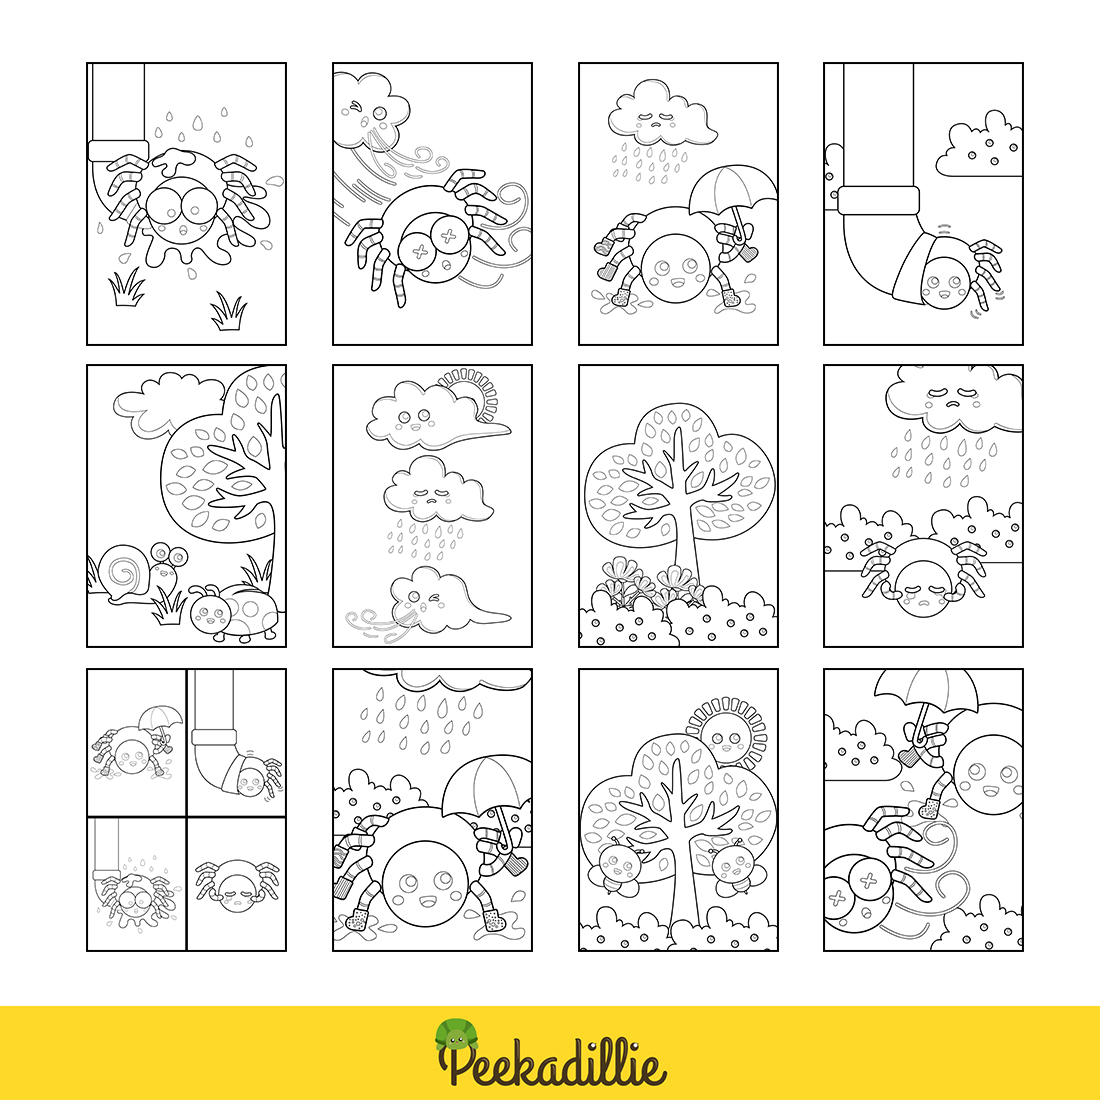 Itsy Bitsy Spider Kids Bedtime Story Classic Rhymes Coloring Pages Activity For Kids And Adult preview image.